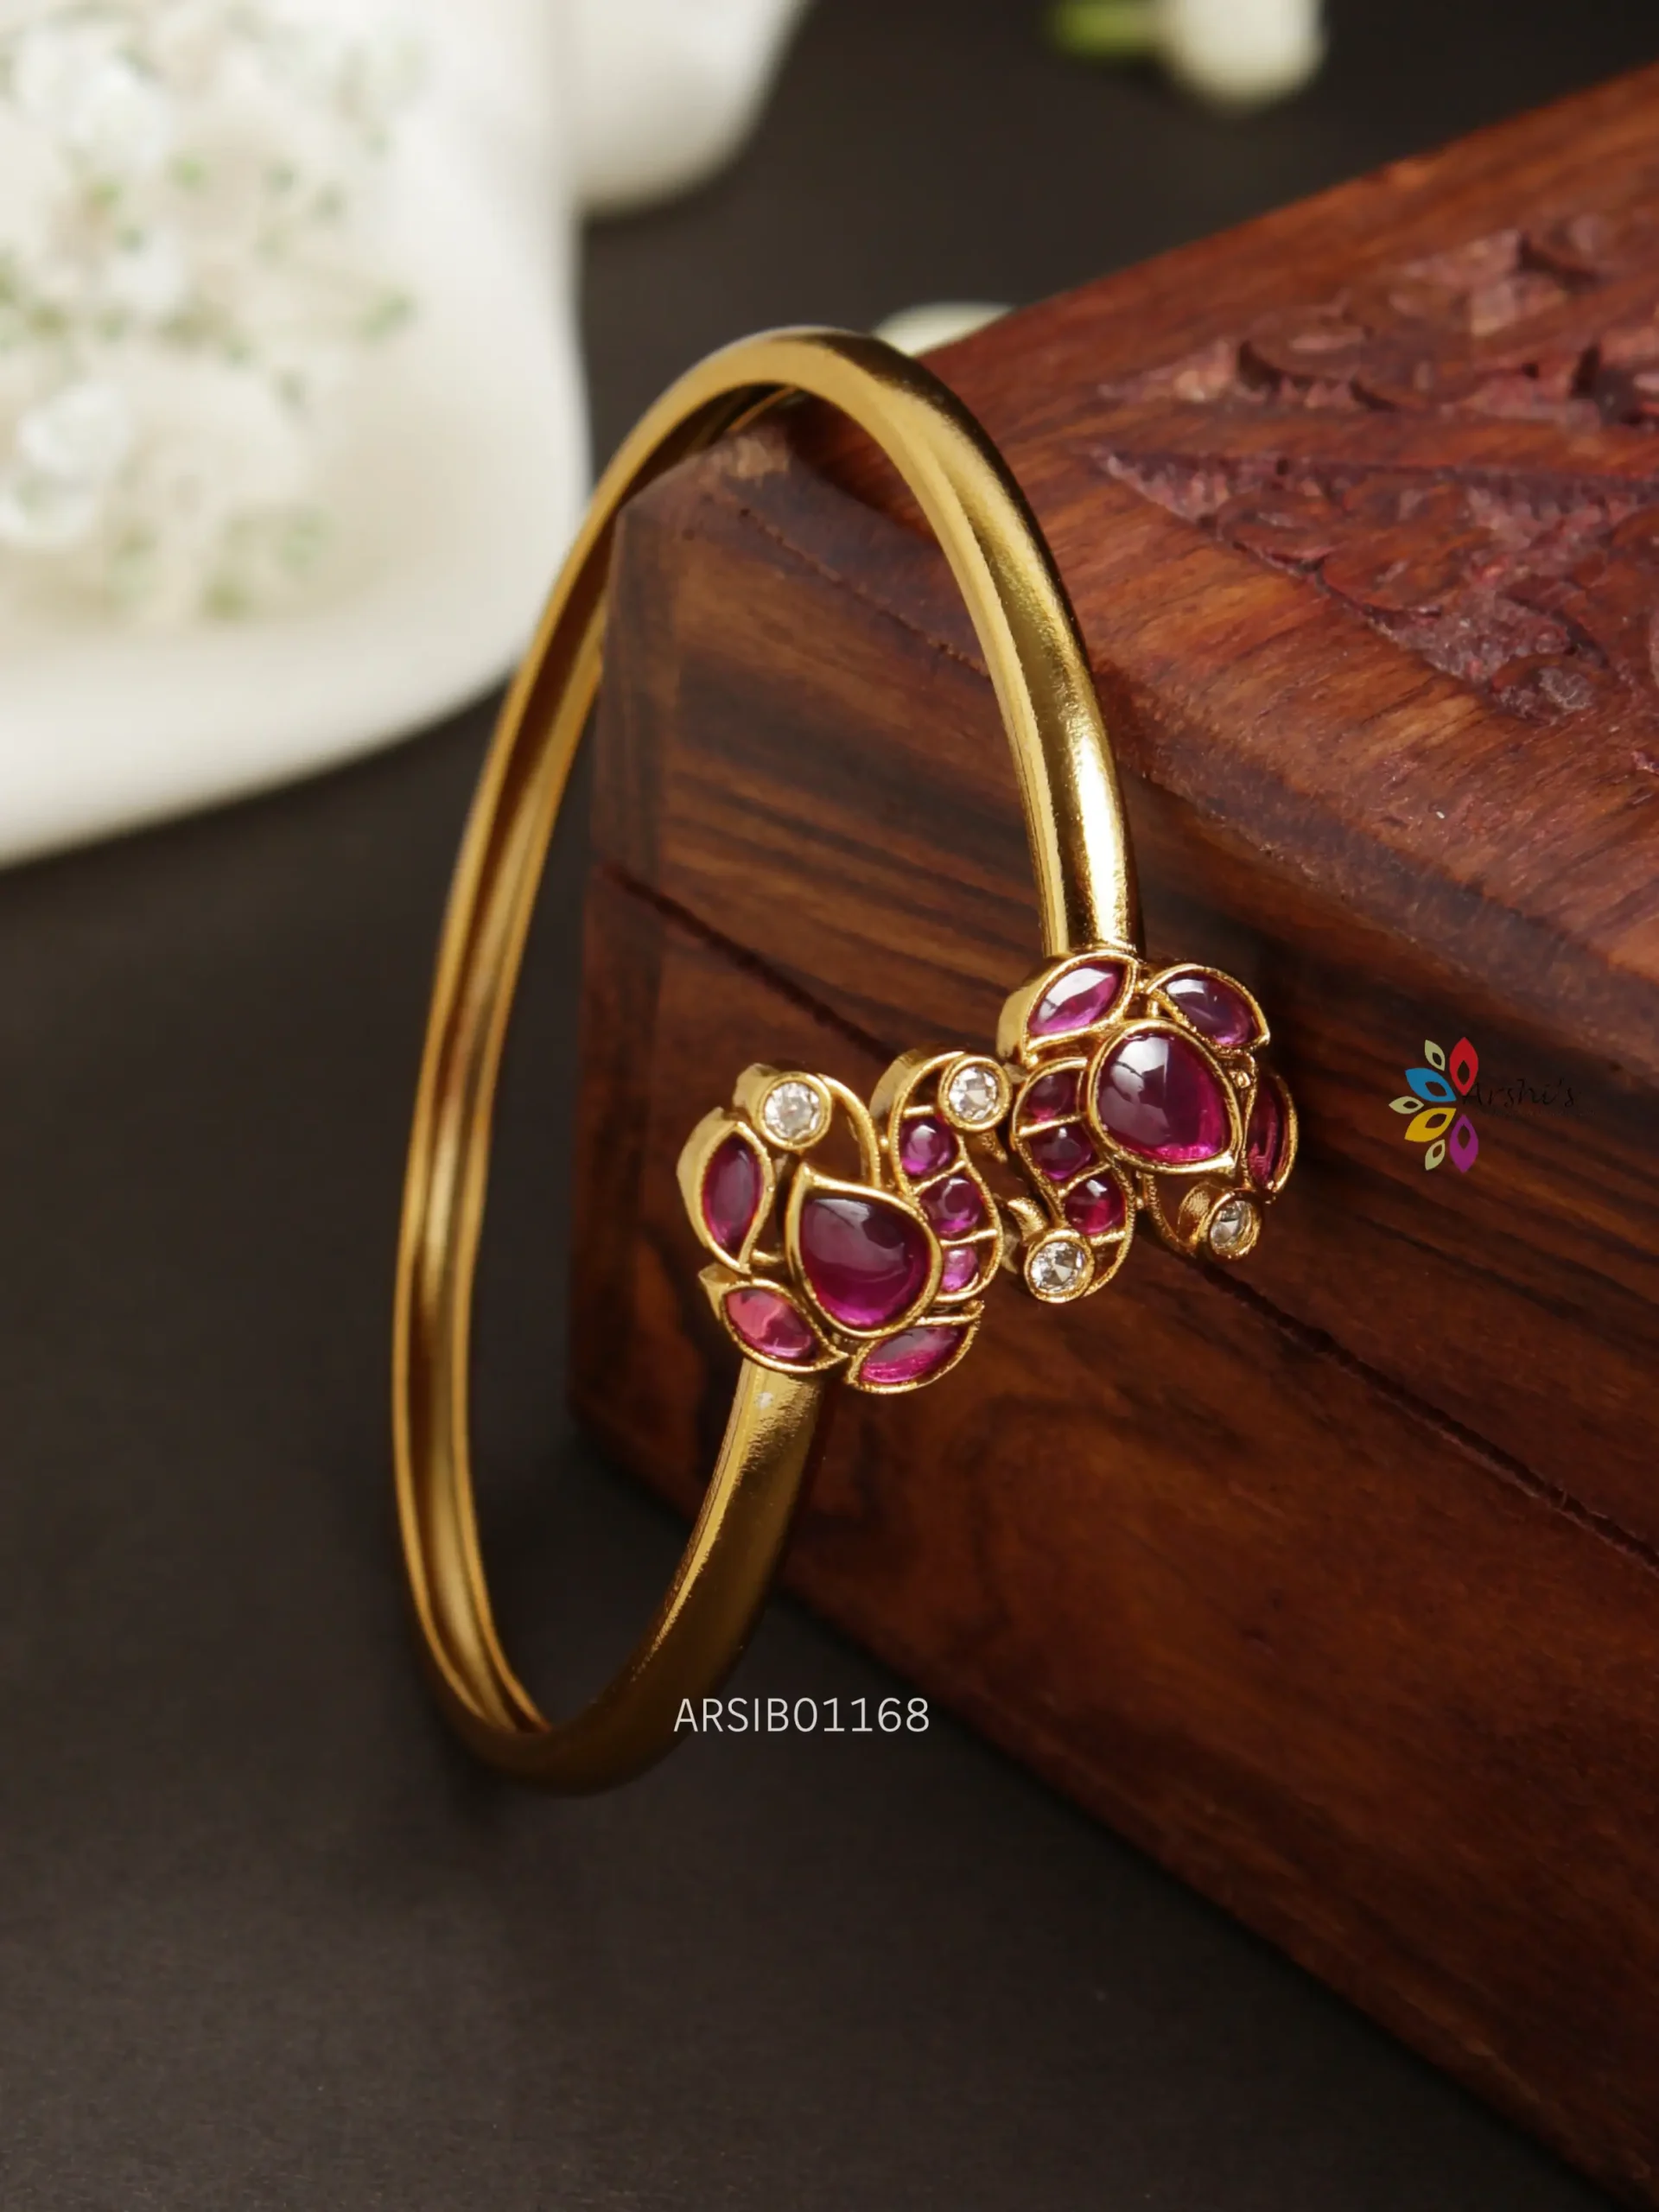 Unique Traditional Bangles Online at Candere by Kalyan Jewellers.